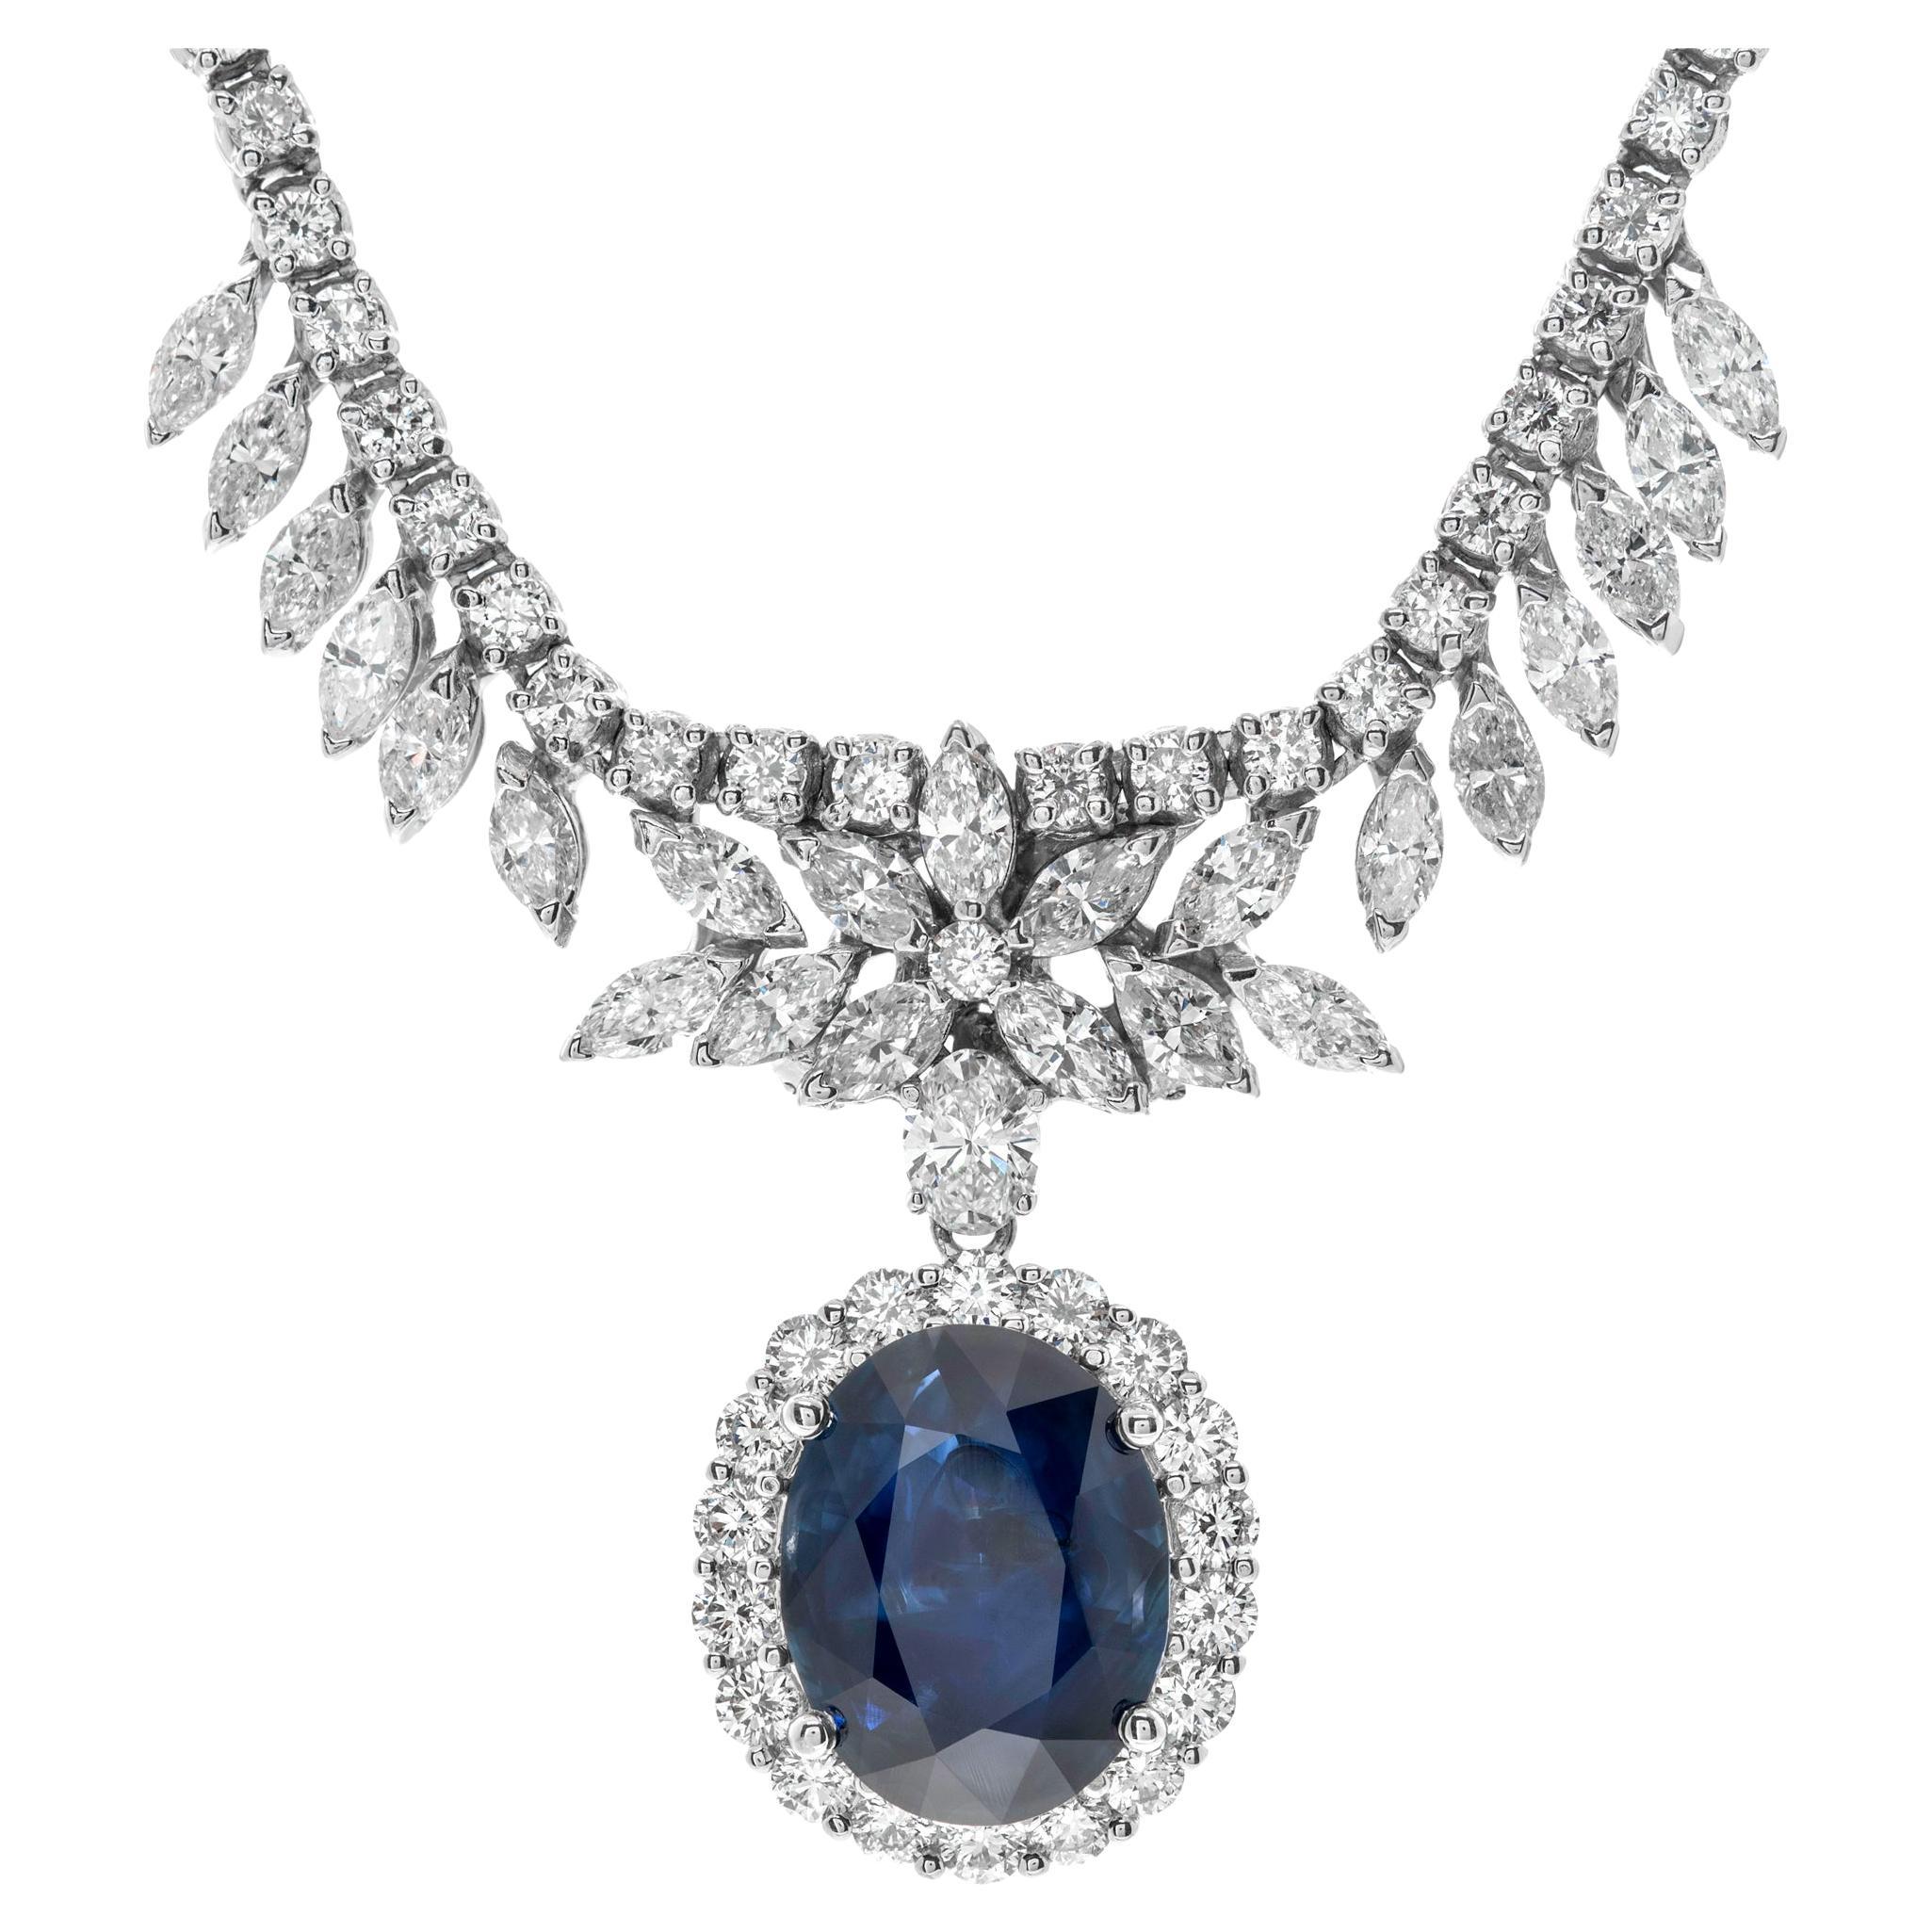 White gold necklace w/ round marquise oval cut diamond & blue oval cut sapphires